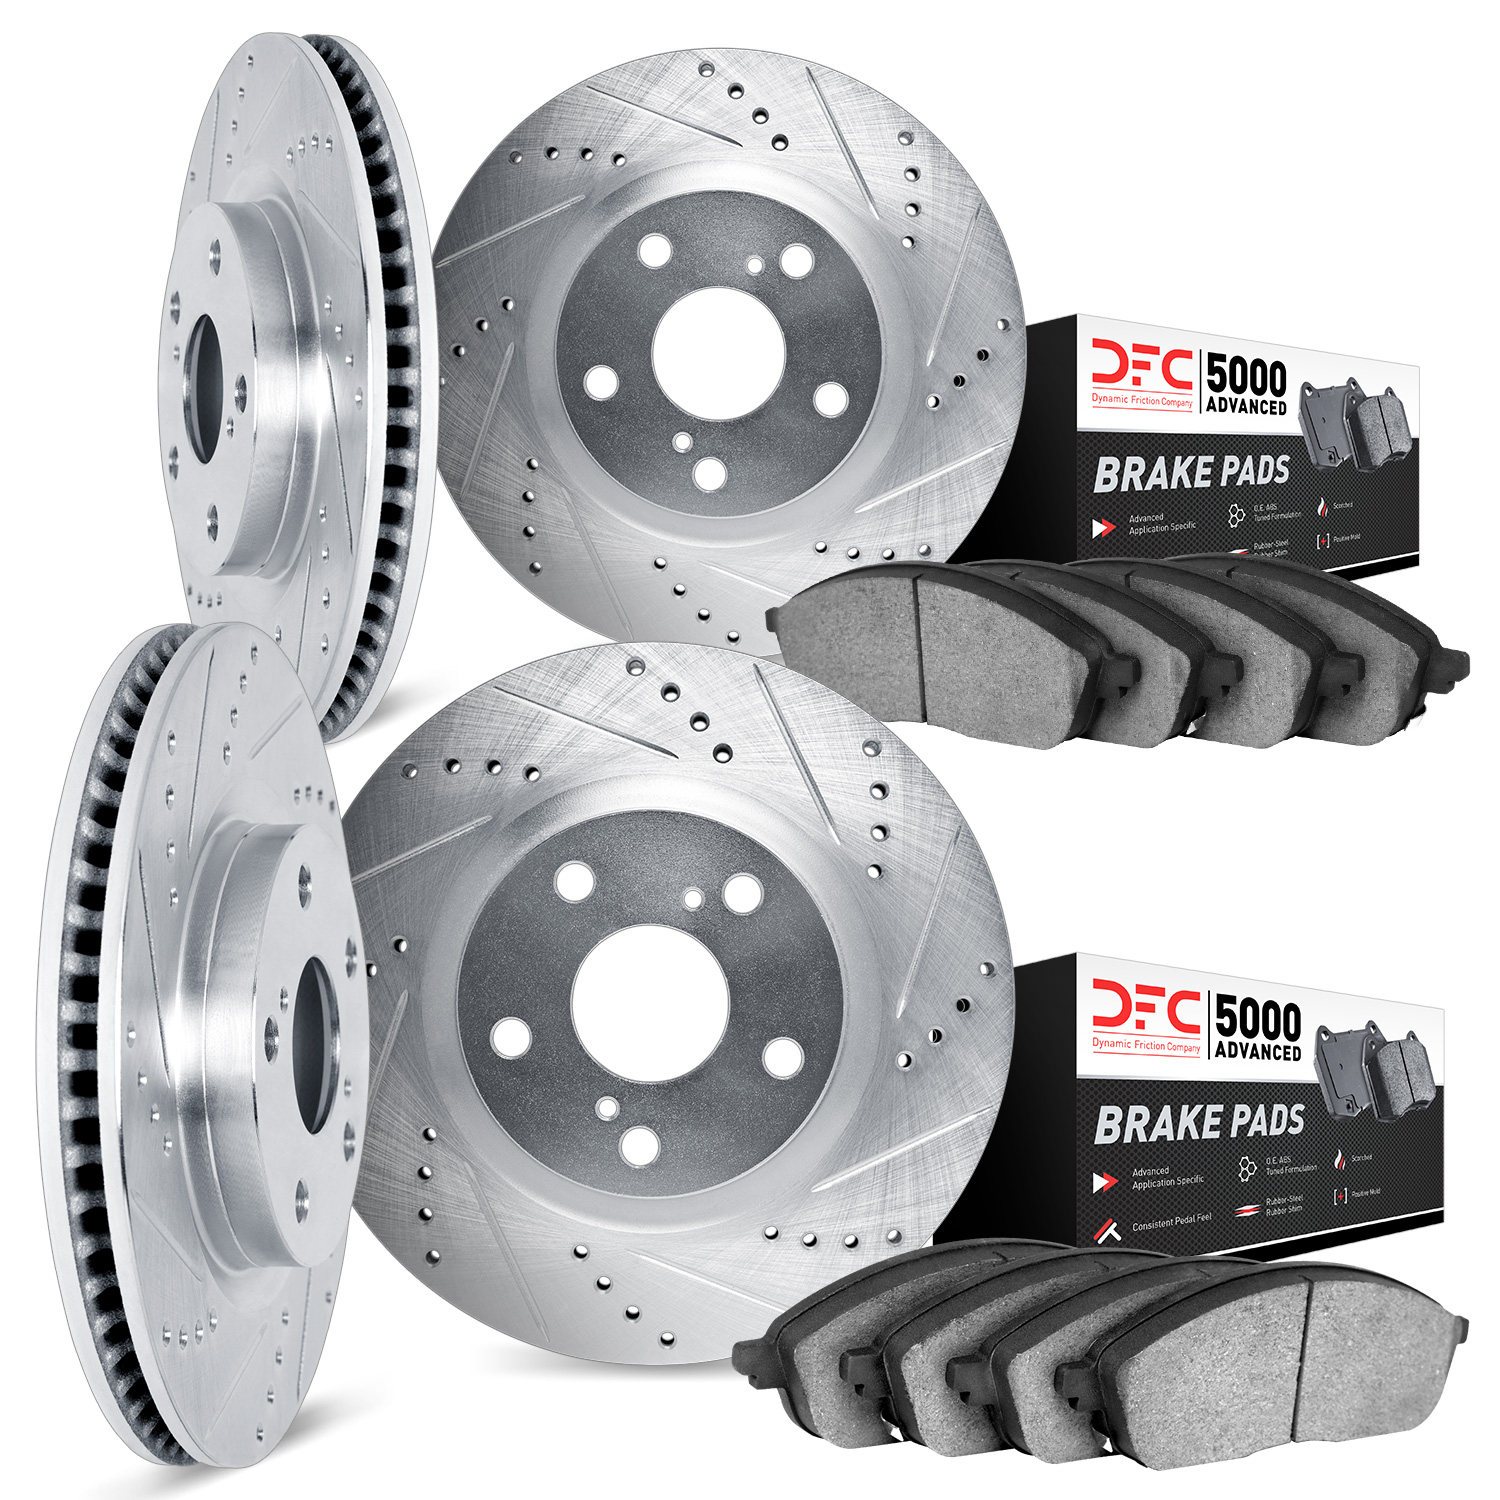 7504-54383 Drilled/Slotted Brake Rotors w/5000 Advanced Brake Pads Kit [Silver], 2013-2019 Ford/Lincoln/Mercury/Mazda, Position: